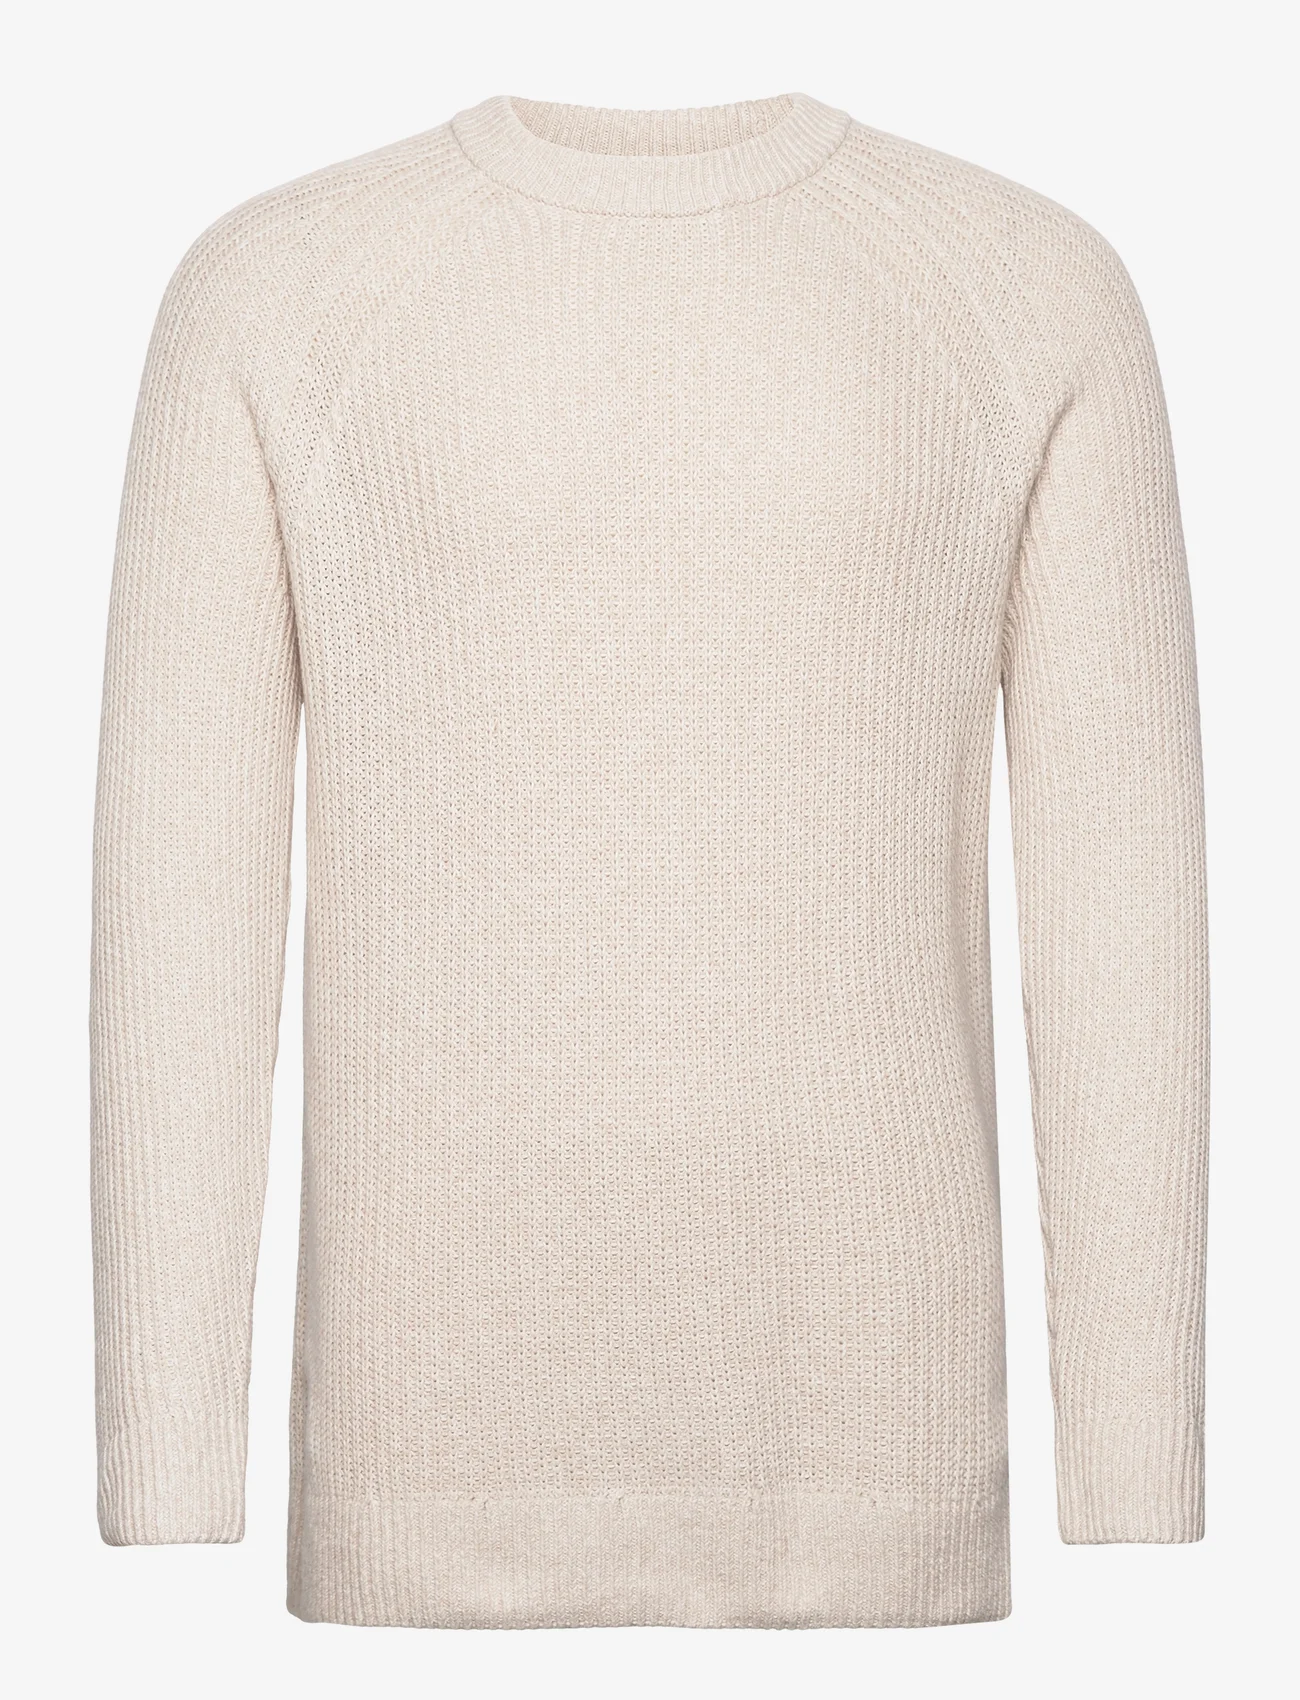 Abercrombie & Fitch - ANF MENS SWEATERS - rundhals - oatmeal marl - 0